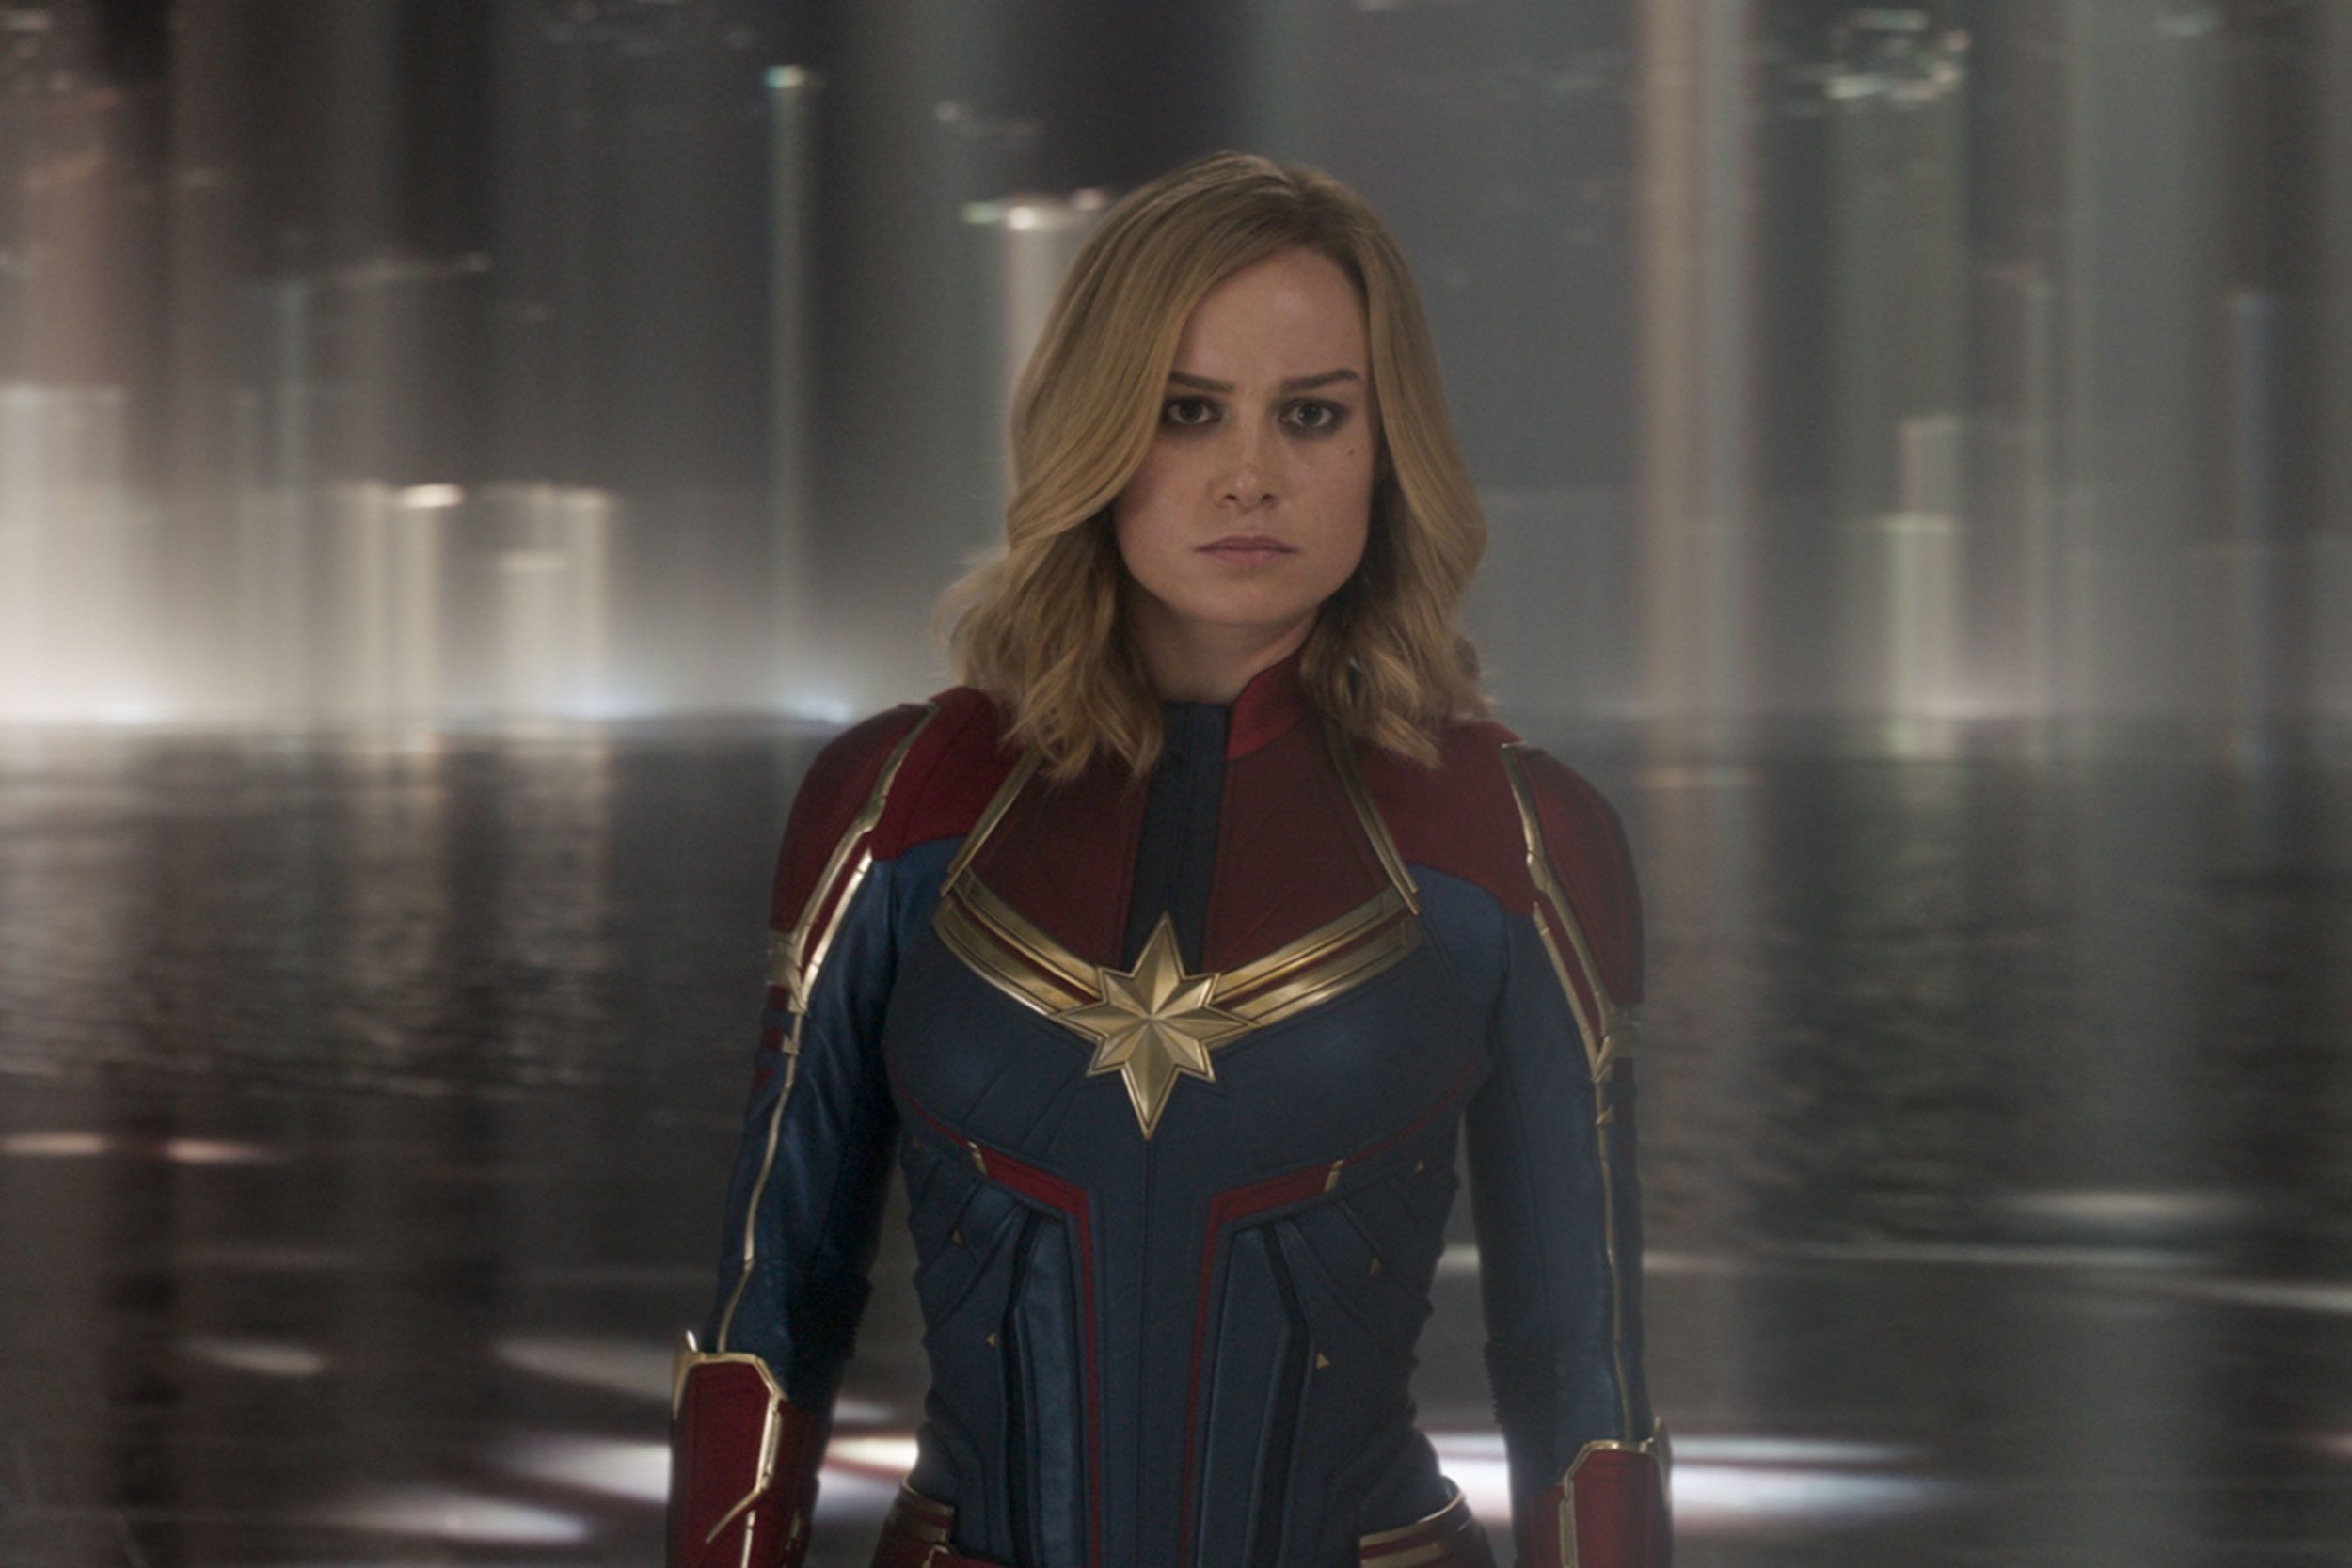 <p>Larson plays Captain Marvel, who made her debut in her 2019 solo film. That movie was released before <em>Endgame</em>, but Larson shot her <em>Endgame</em> scenes before she filmed <em>Captain Marvel</em>. As such, <em>Captain Marvel</em> directors Anna Boden and Ryan Fleck were on set to ensure the version of Captain Marvel in <em>Endgame</em> fit their plans and vision for their movie.</p><p>You may also like: <a href='https://www.yardbarker.com/entertainment/articles/20_disney_movies_you_totally_forgot_existed_110623/s1__39466485'>20 Disney movies you totally forgot existed</a></p>